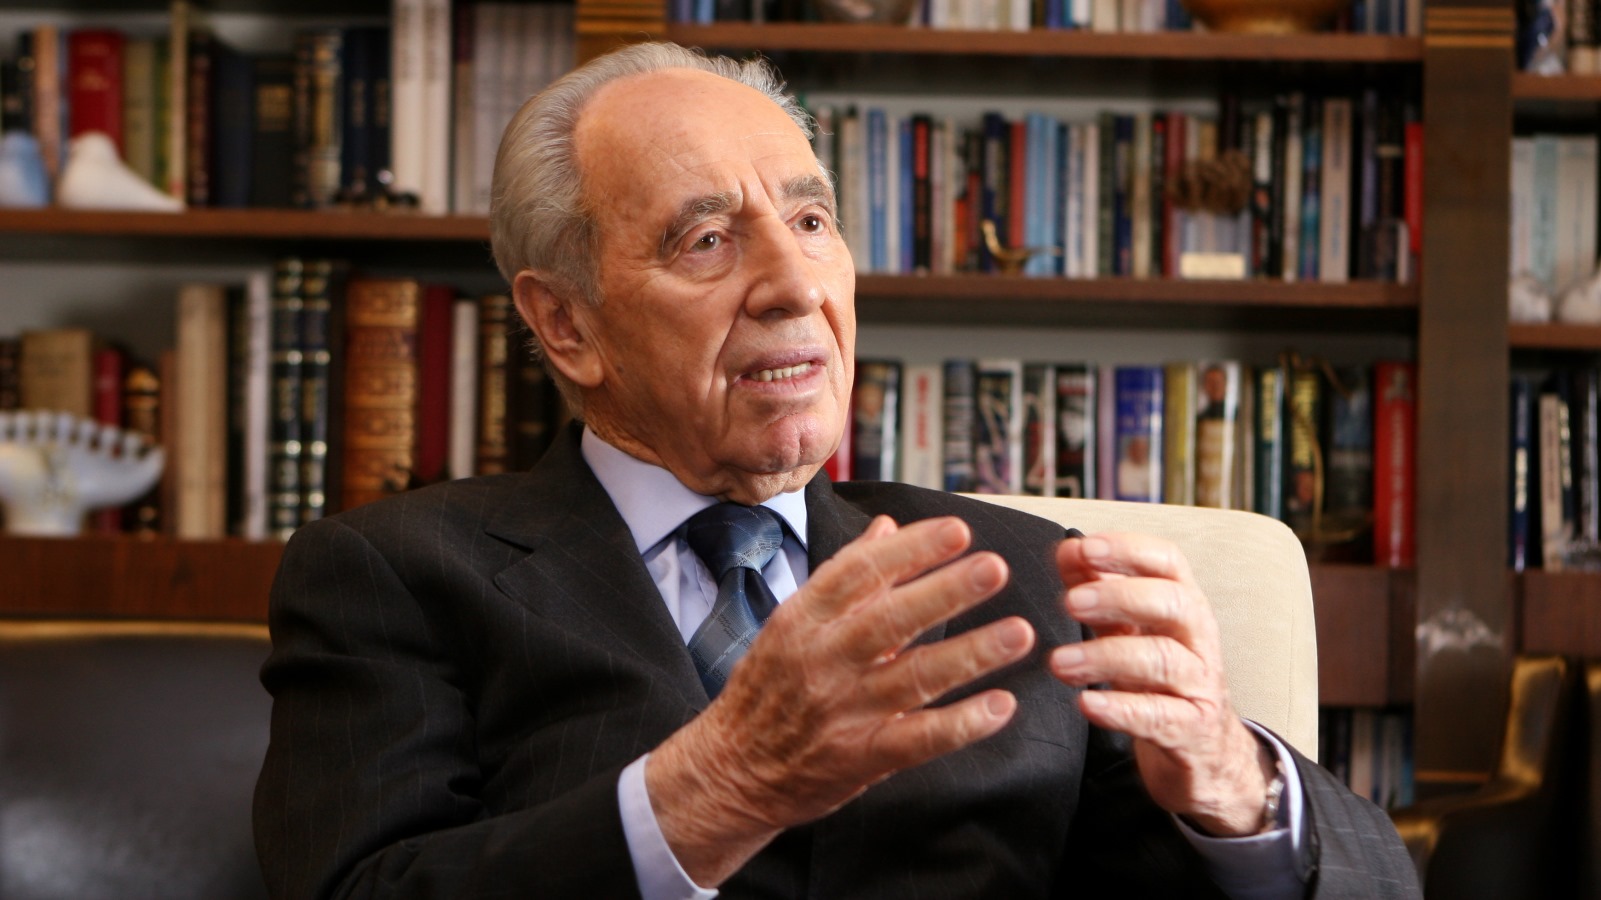 Portrait of Shimon Peres in the presidential office in Jerusalem, March 5, 2008. Photo by Yossi Zamir/FLASH90